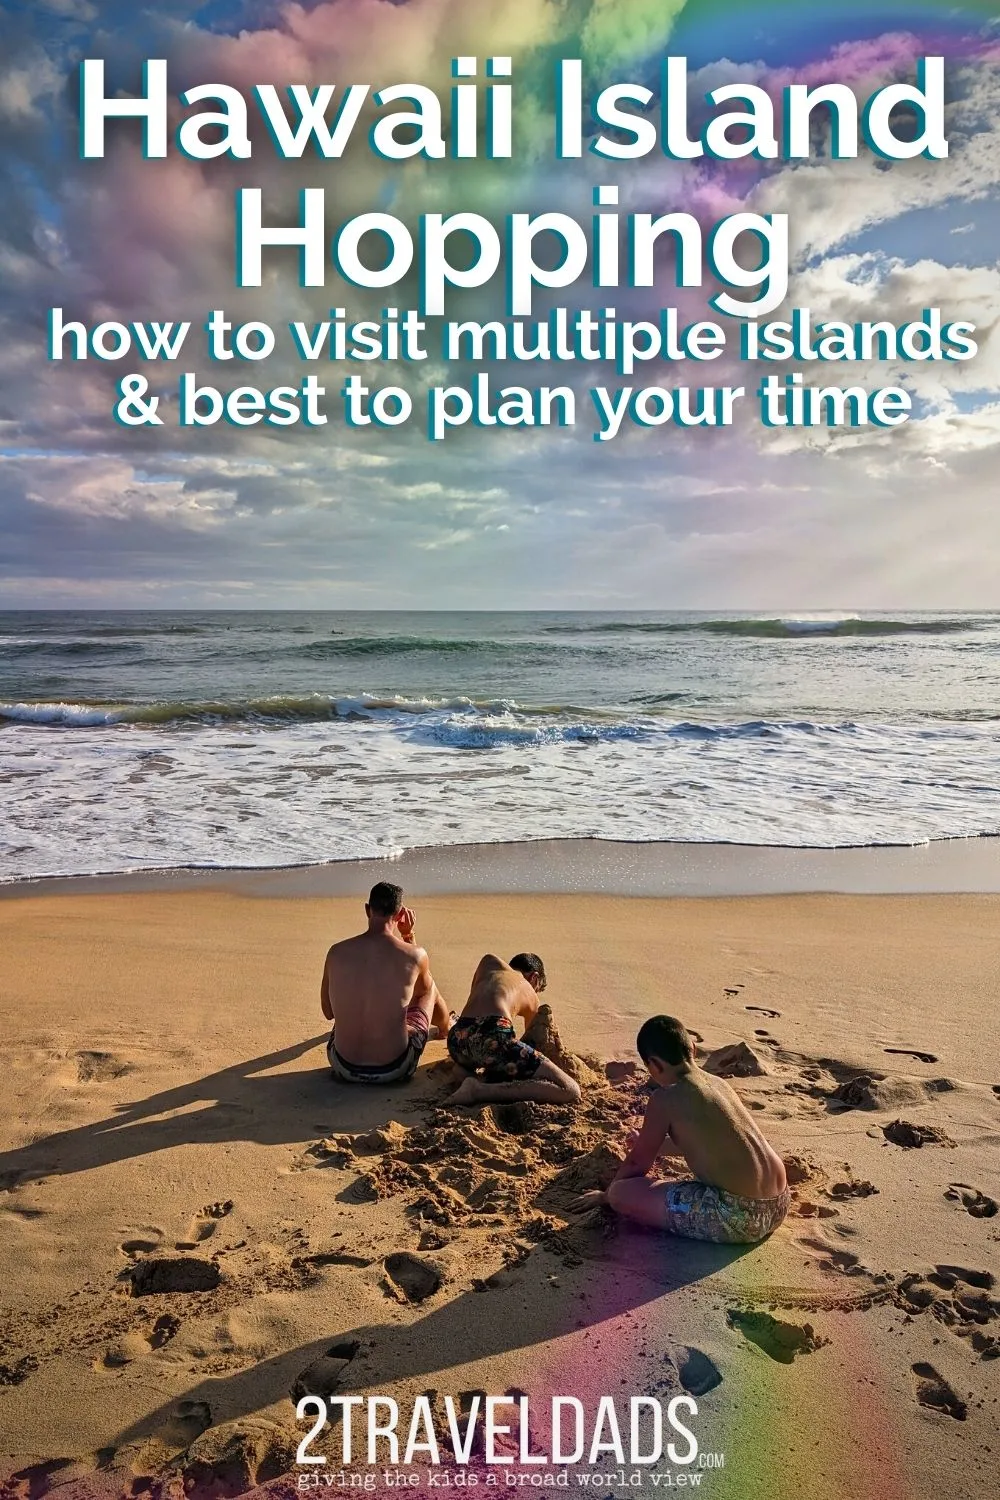 Hawaii island hopping is a complex but wonderful way to experience multiple Hawaiian Islands. We answer how to travel from island to island, how much time to spend on each, and our favorite must-do activities across Hawaii.